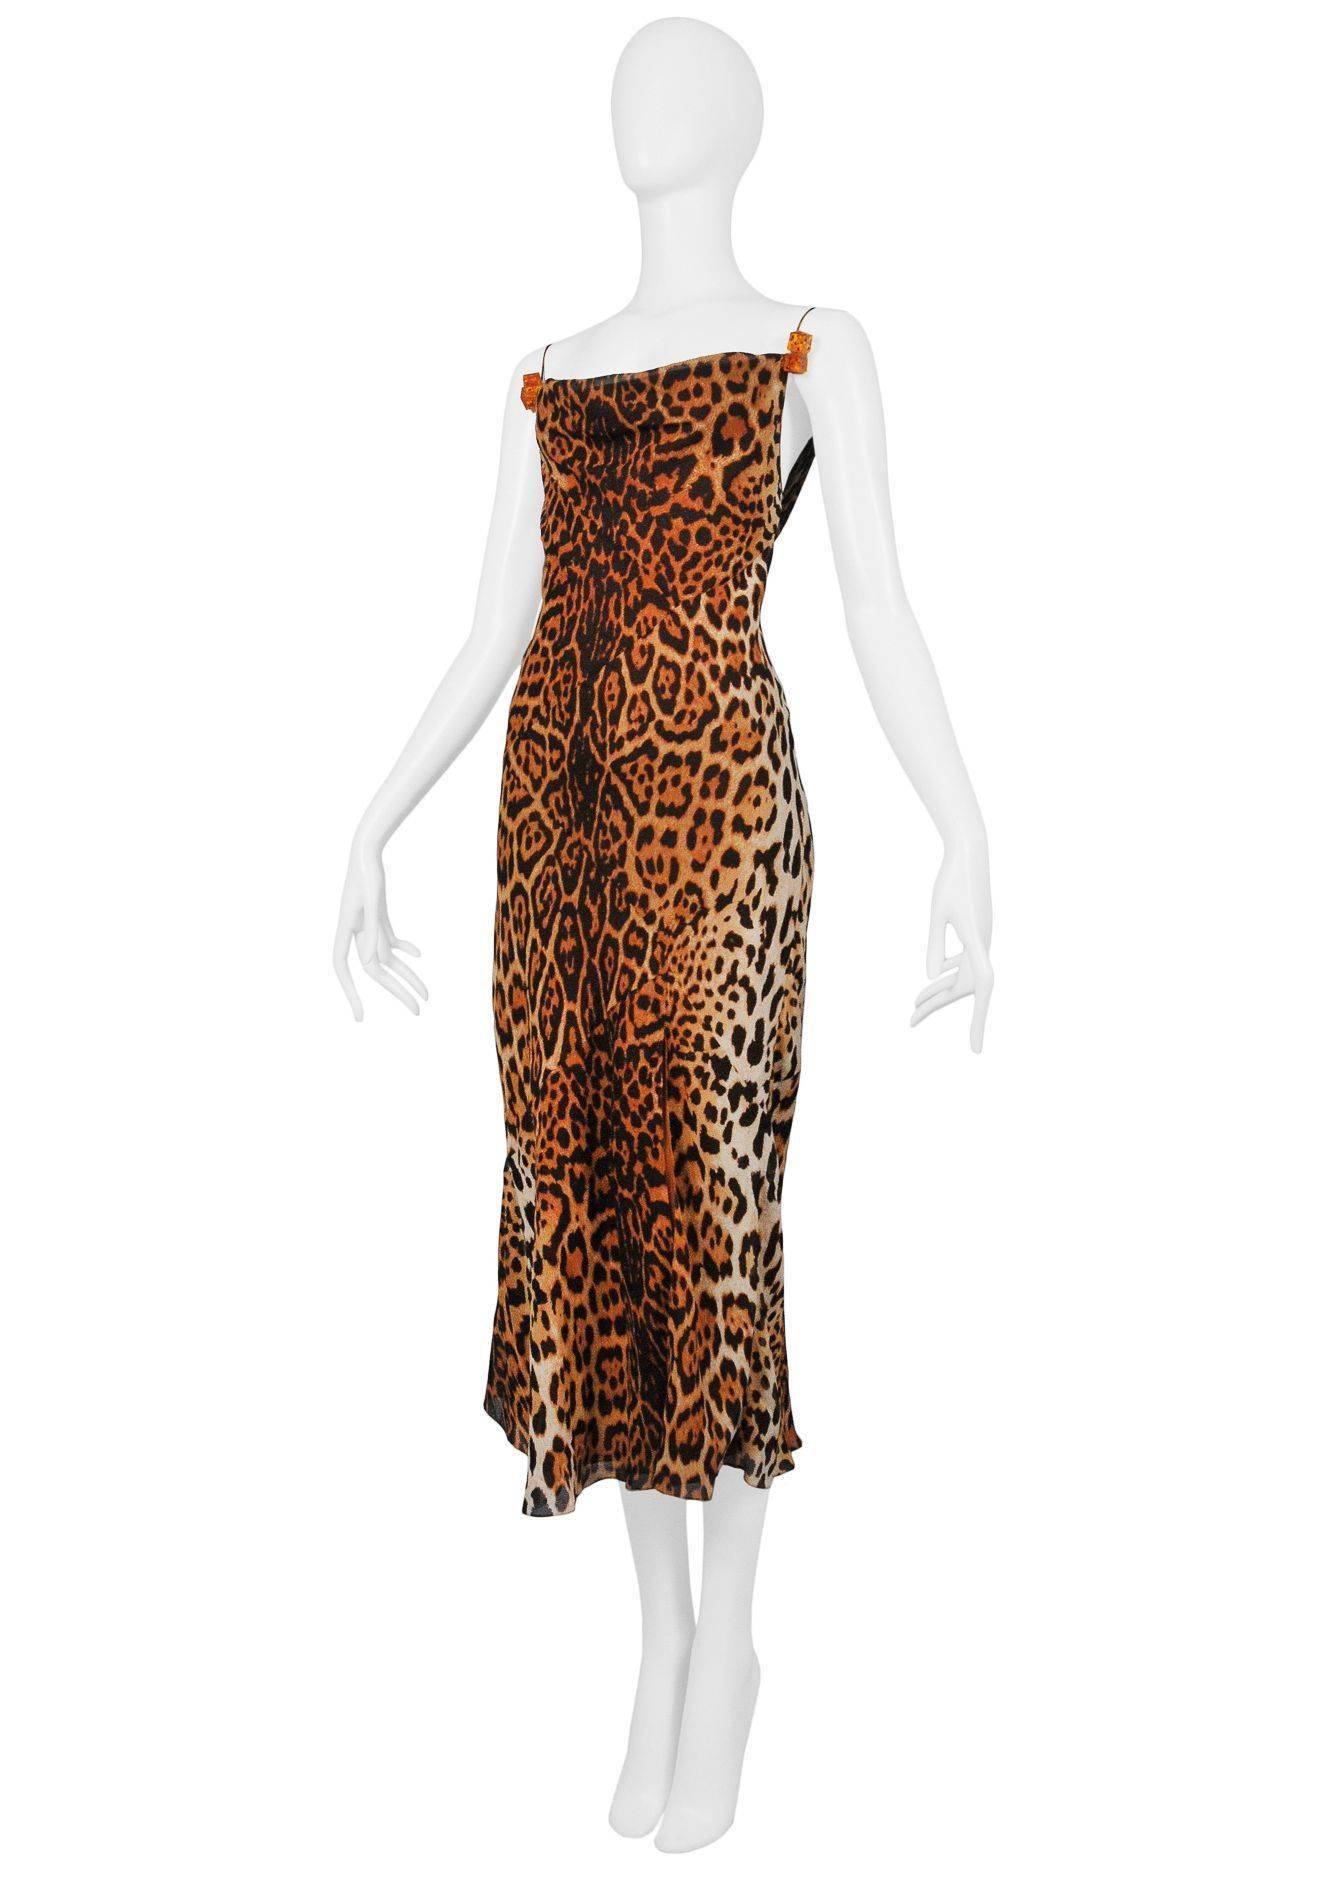 John Galliano for Christian Dior convertible slip dress, that can also be worn as a top, with Cuban Cigar print throughout.